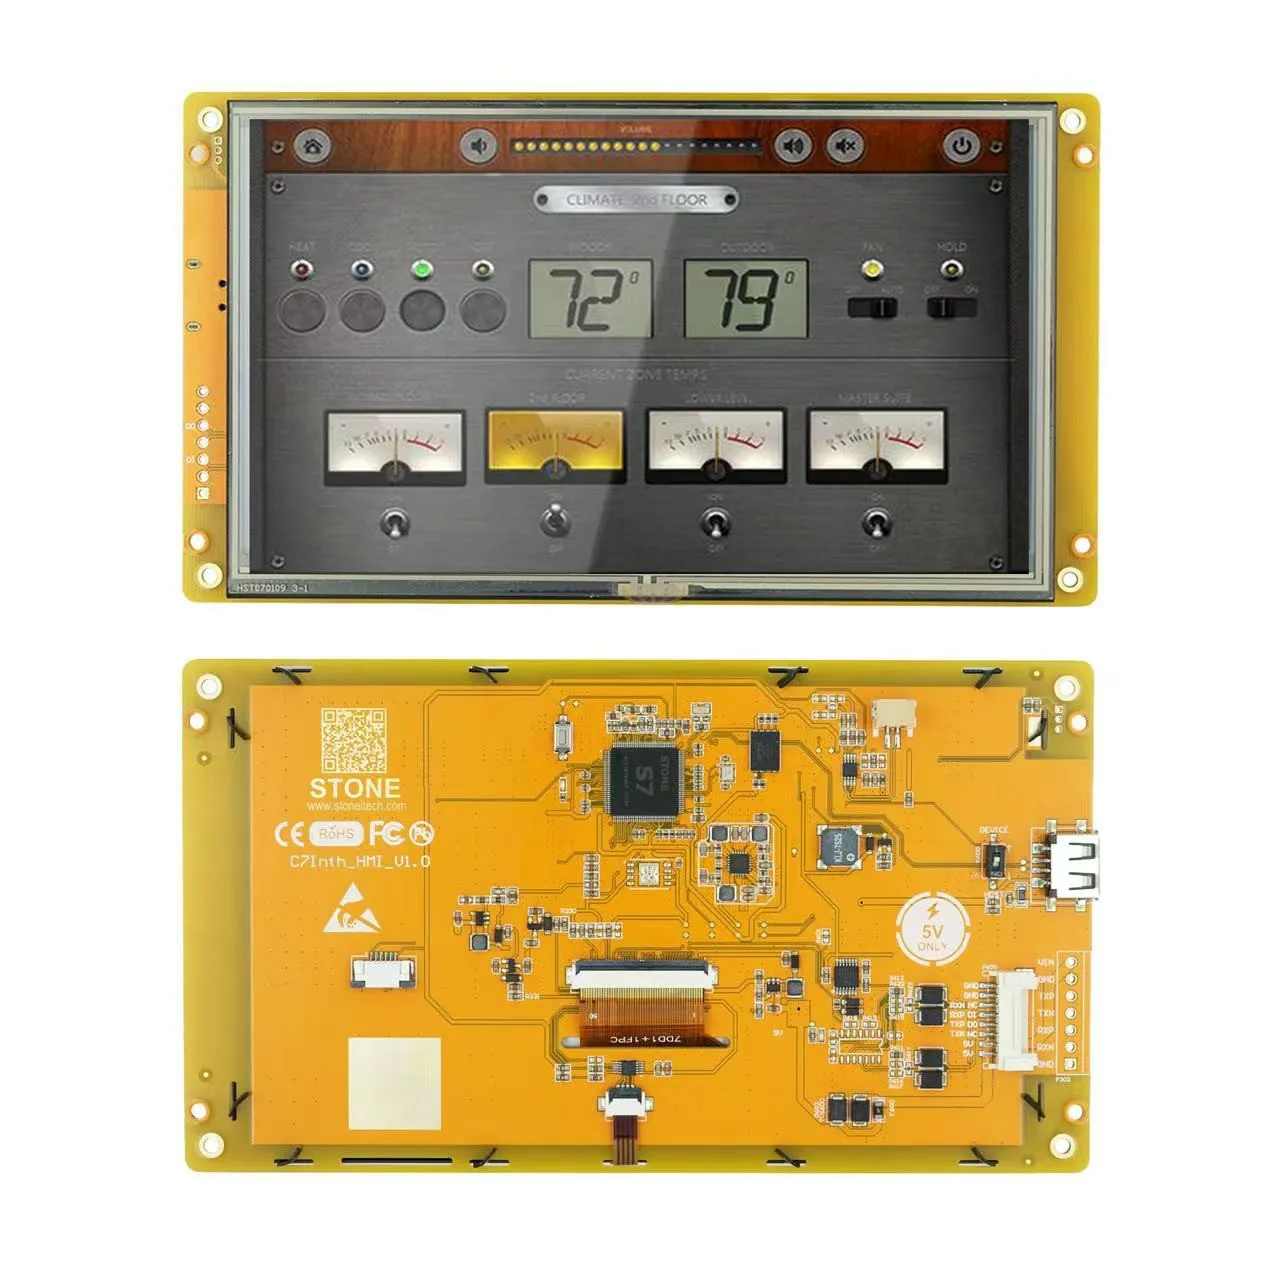 Stone 7.0 Inch TFT LCD Programmable Logic LCD Controller Touch Screen for Equipment Use Customize Available HMI TFT LCD Display